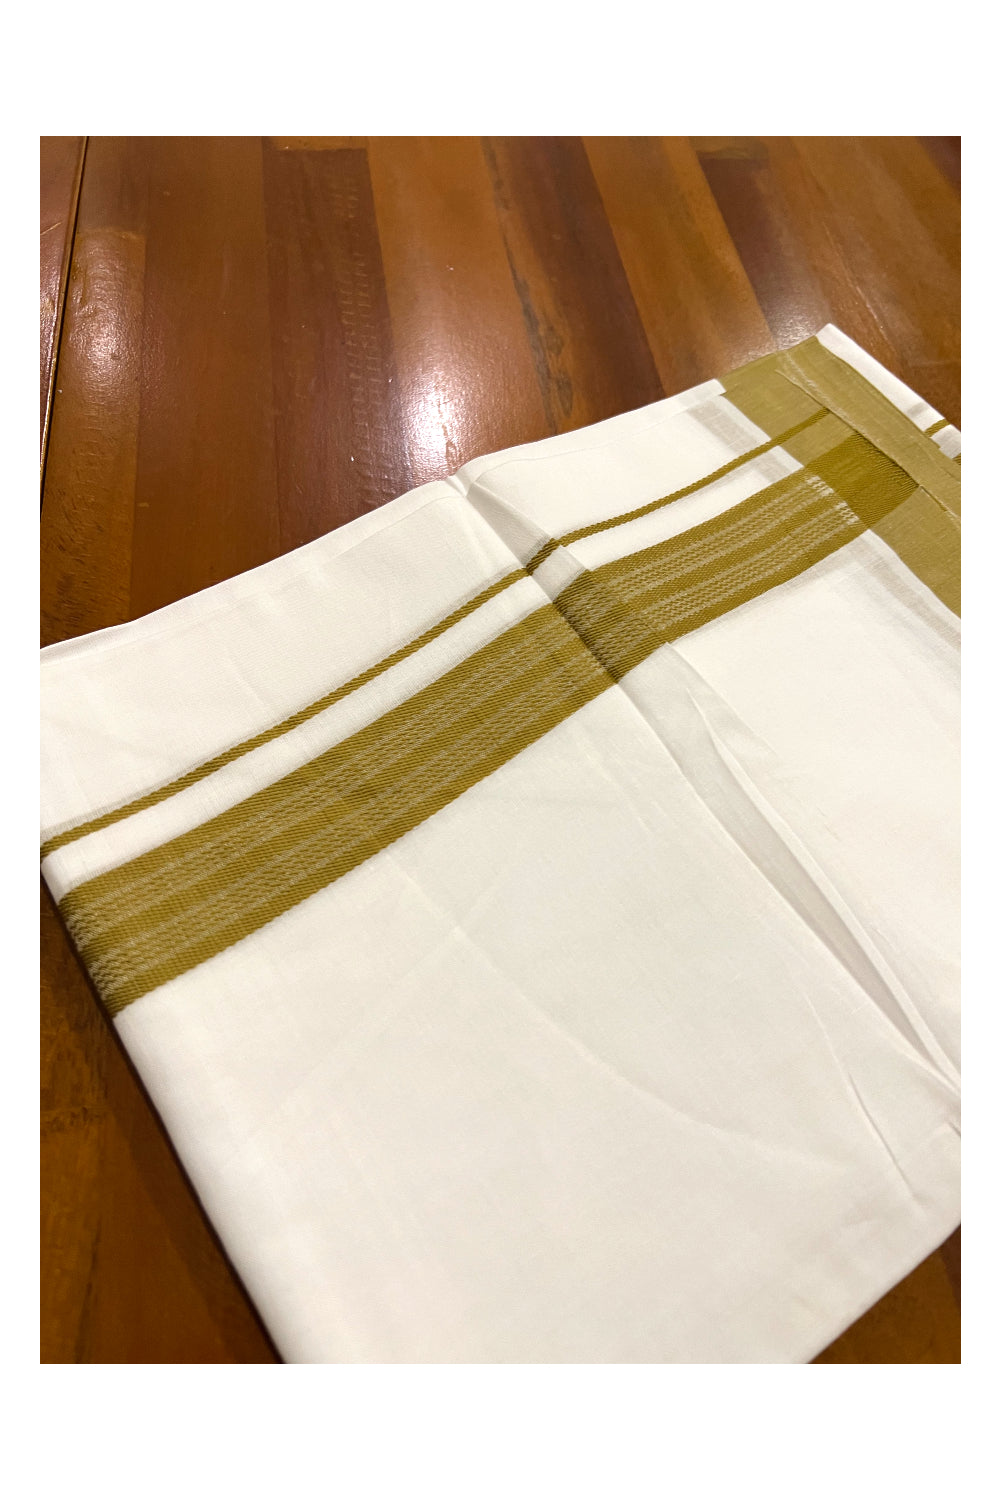 Pure White Cotton Double Mundu with Olive Green Border (South Indian Dhoti)